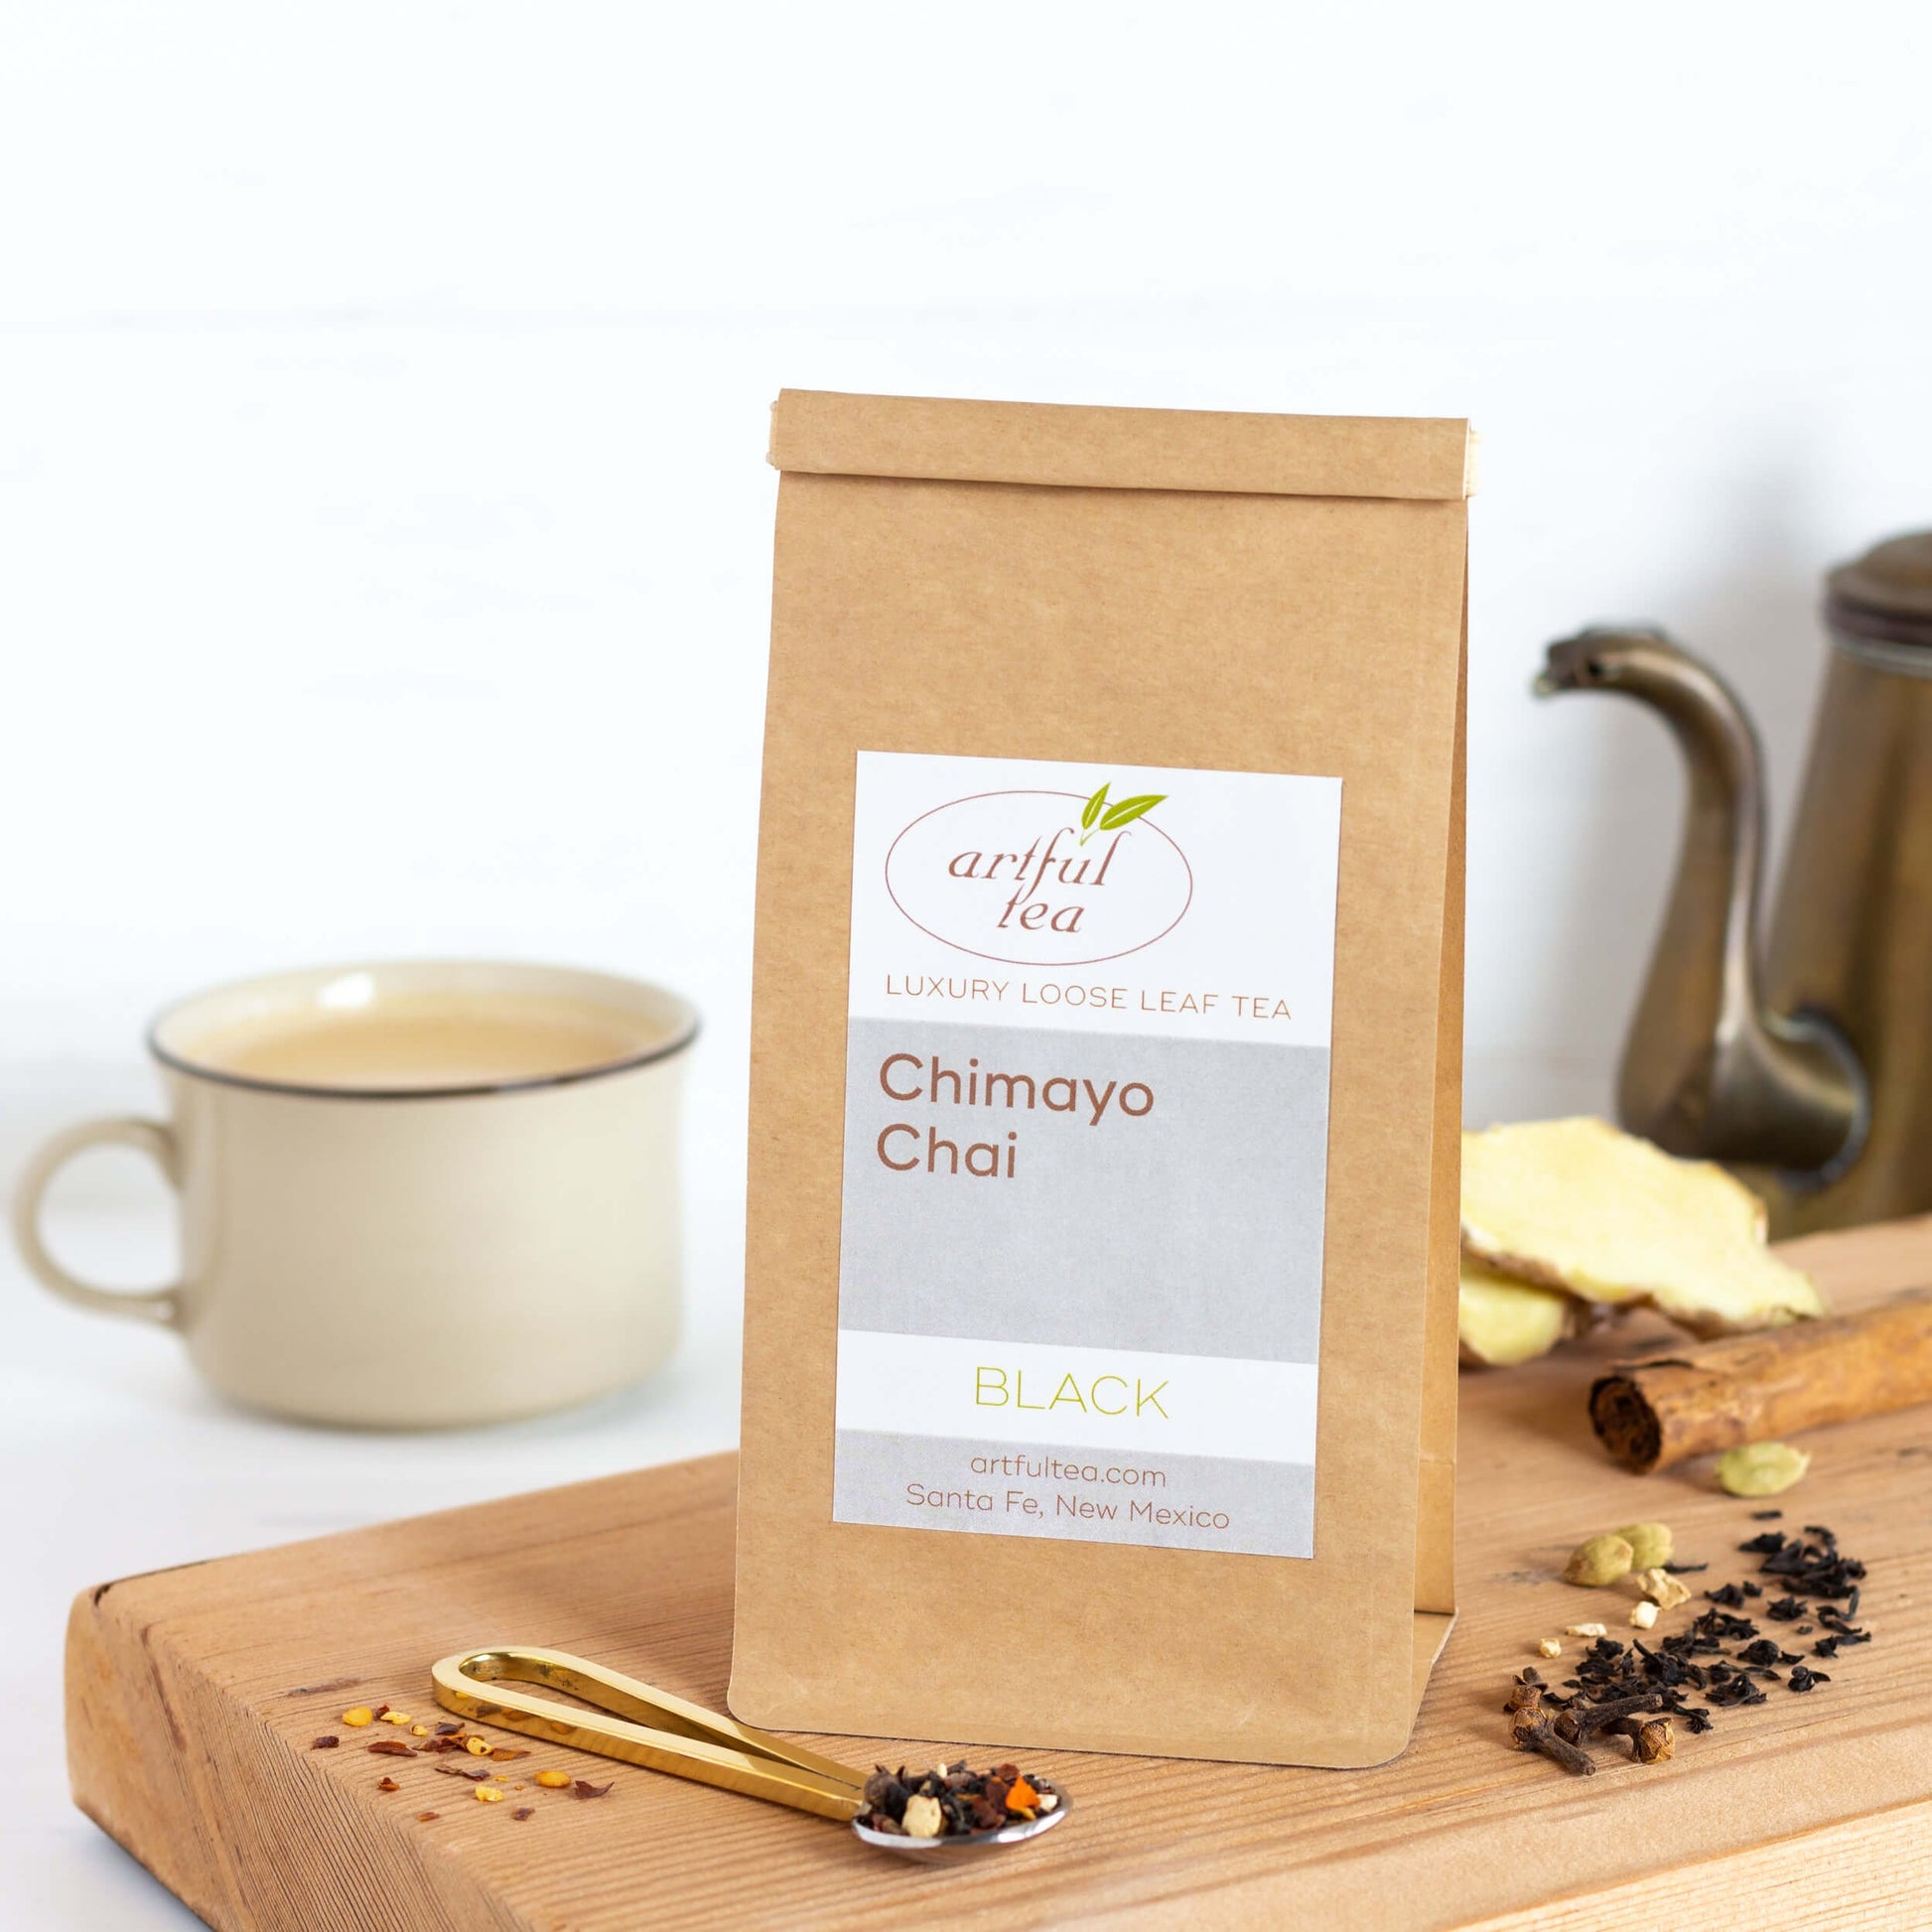 Chimayo Chai Black Tea shown packaged in a kraft bag on a wooden tray. A spoon with tea leaves is in the foreground. More ingredients are on the tray. A tan mug and a copper teapot are in the background.